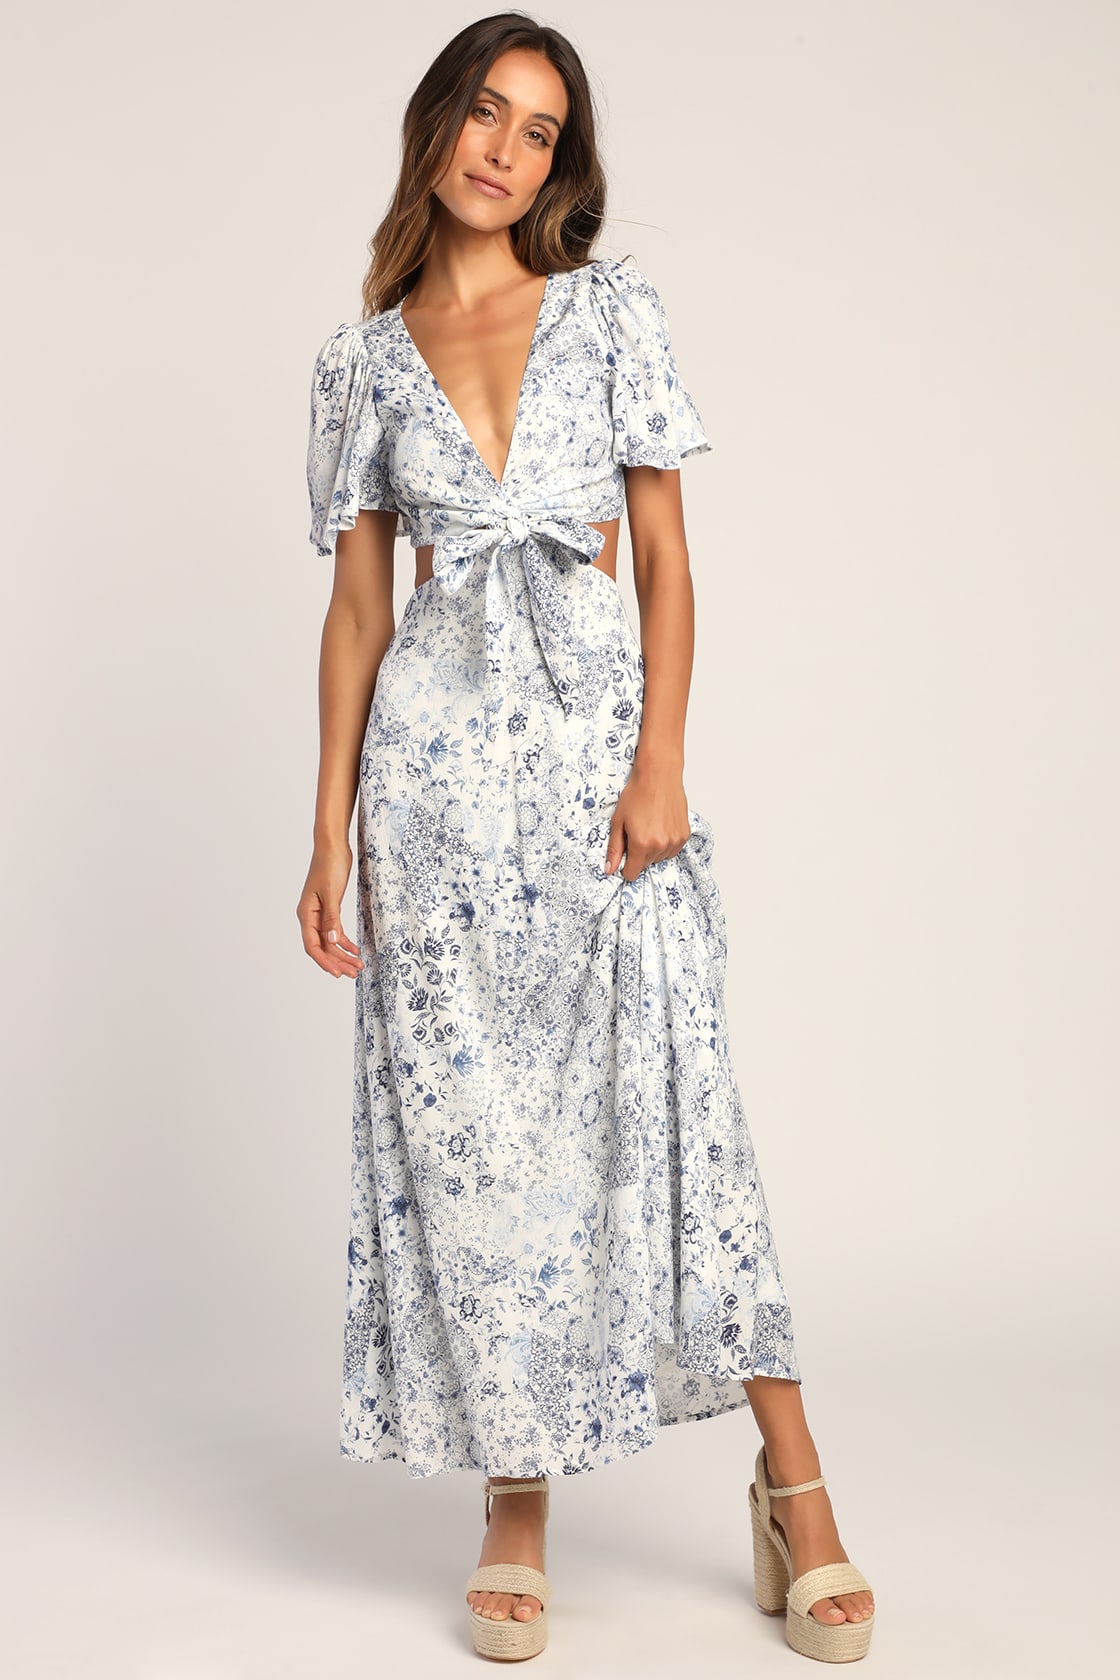 Stroll the Avenues White Floral Print Tie-Front Maxi Dress